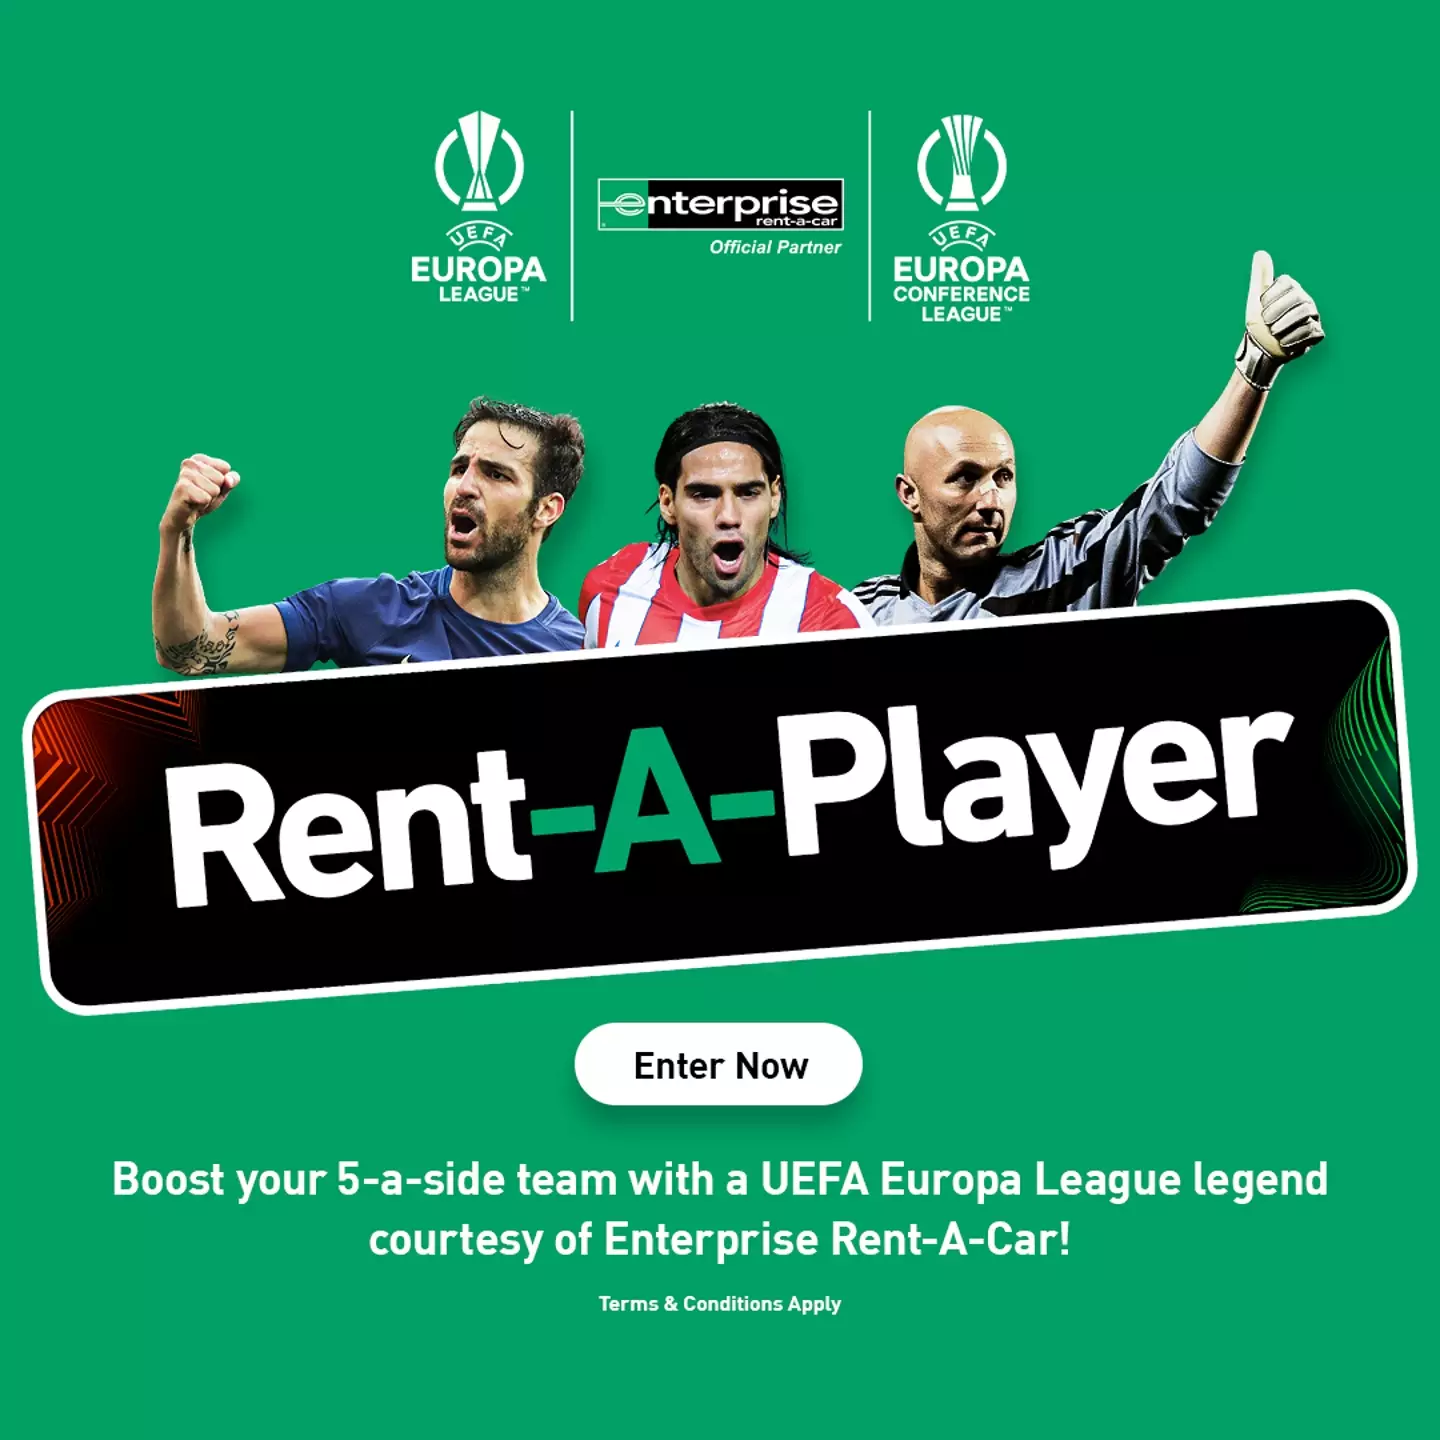 Fans can win the chance to play with Cesc Fabregas (Enterprise)